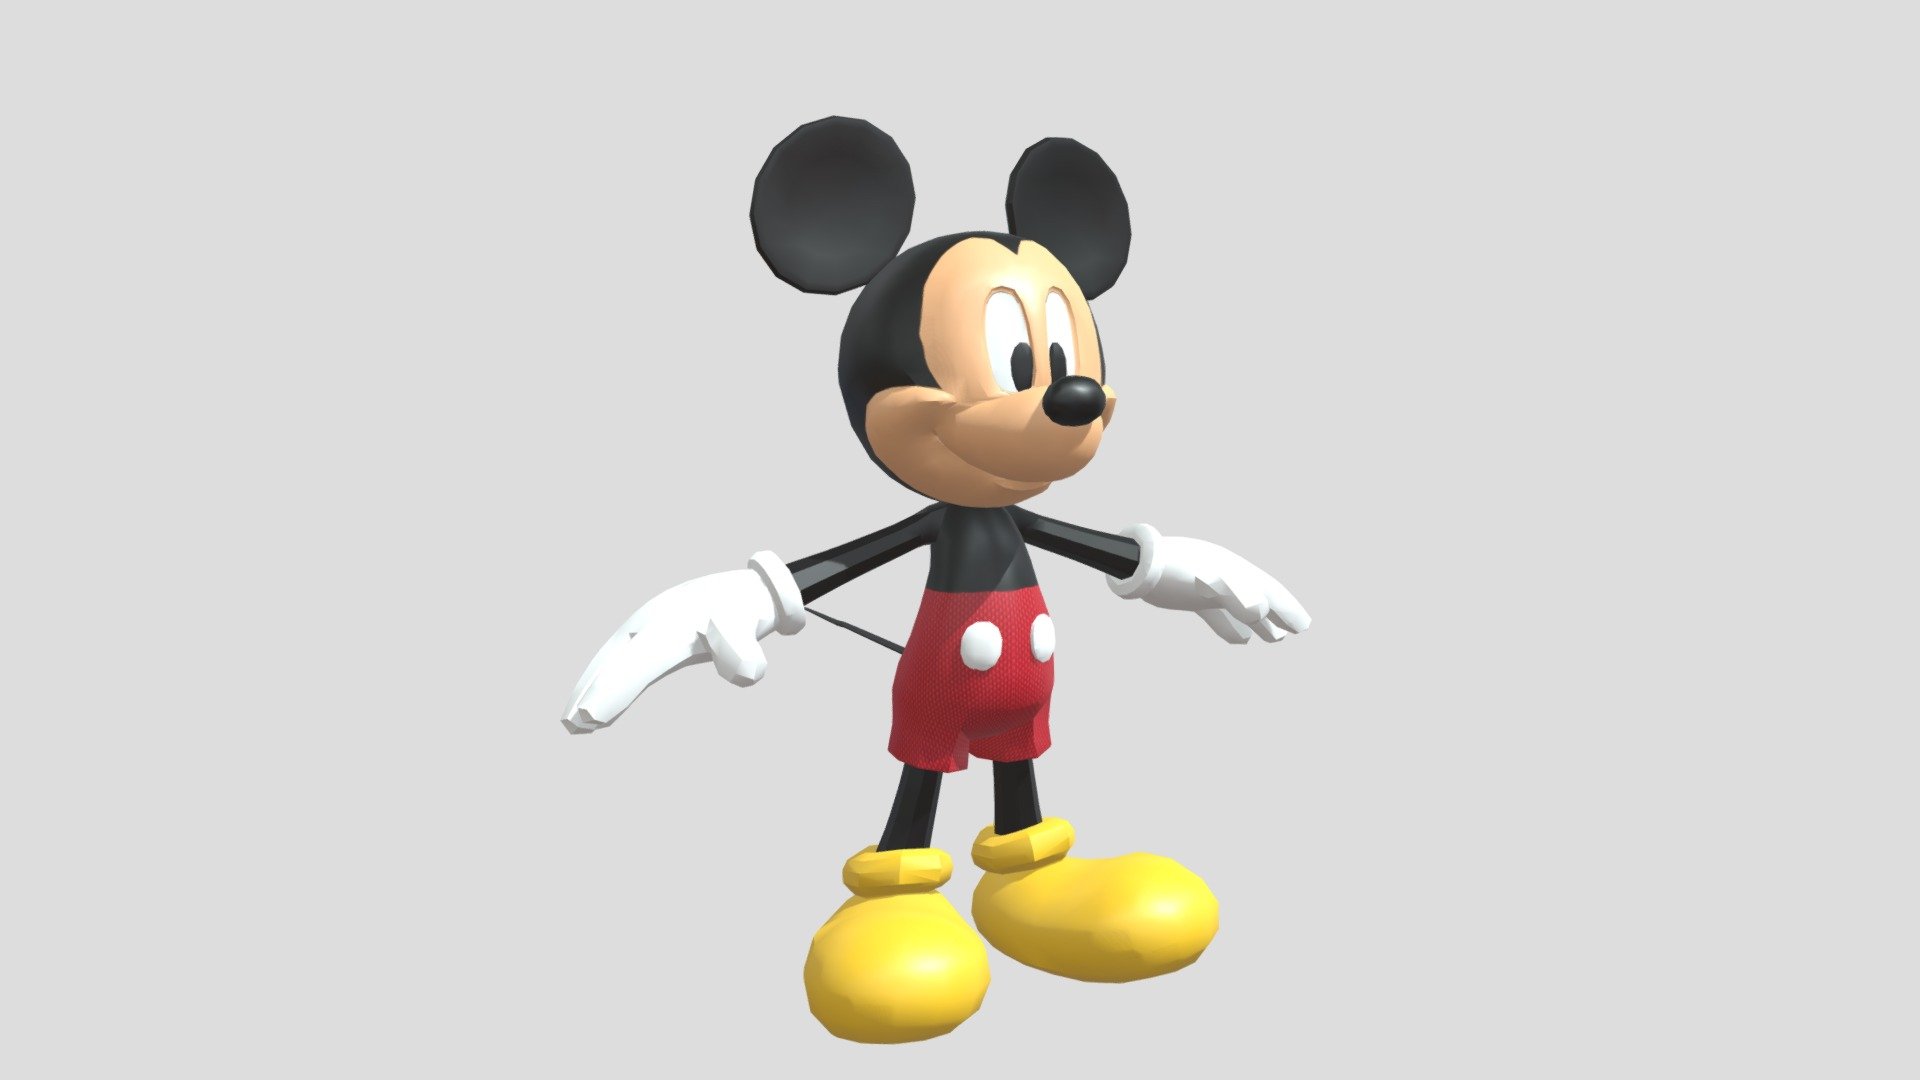 I did not spend alot of time with this model. The texture was the only time consuming part as the original textures in the Mickey model that is part of the show did not have shading. 

(A rendered image in 4K resolution from Prisma 3D before it was imported here.)

(Another render in 4k resolution in a different pose.)
I have resumed commenting on this model mainly because I really needed to calm down 3d model